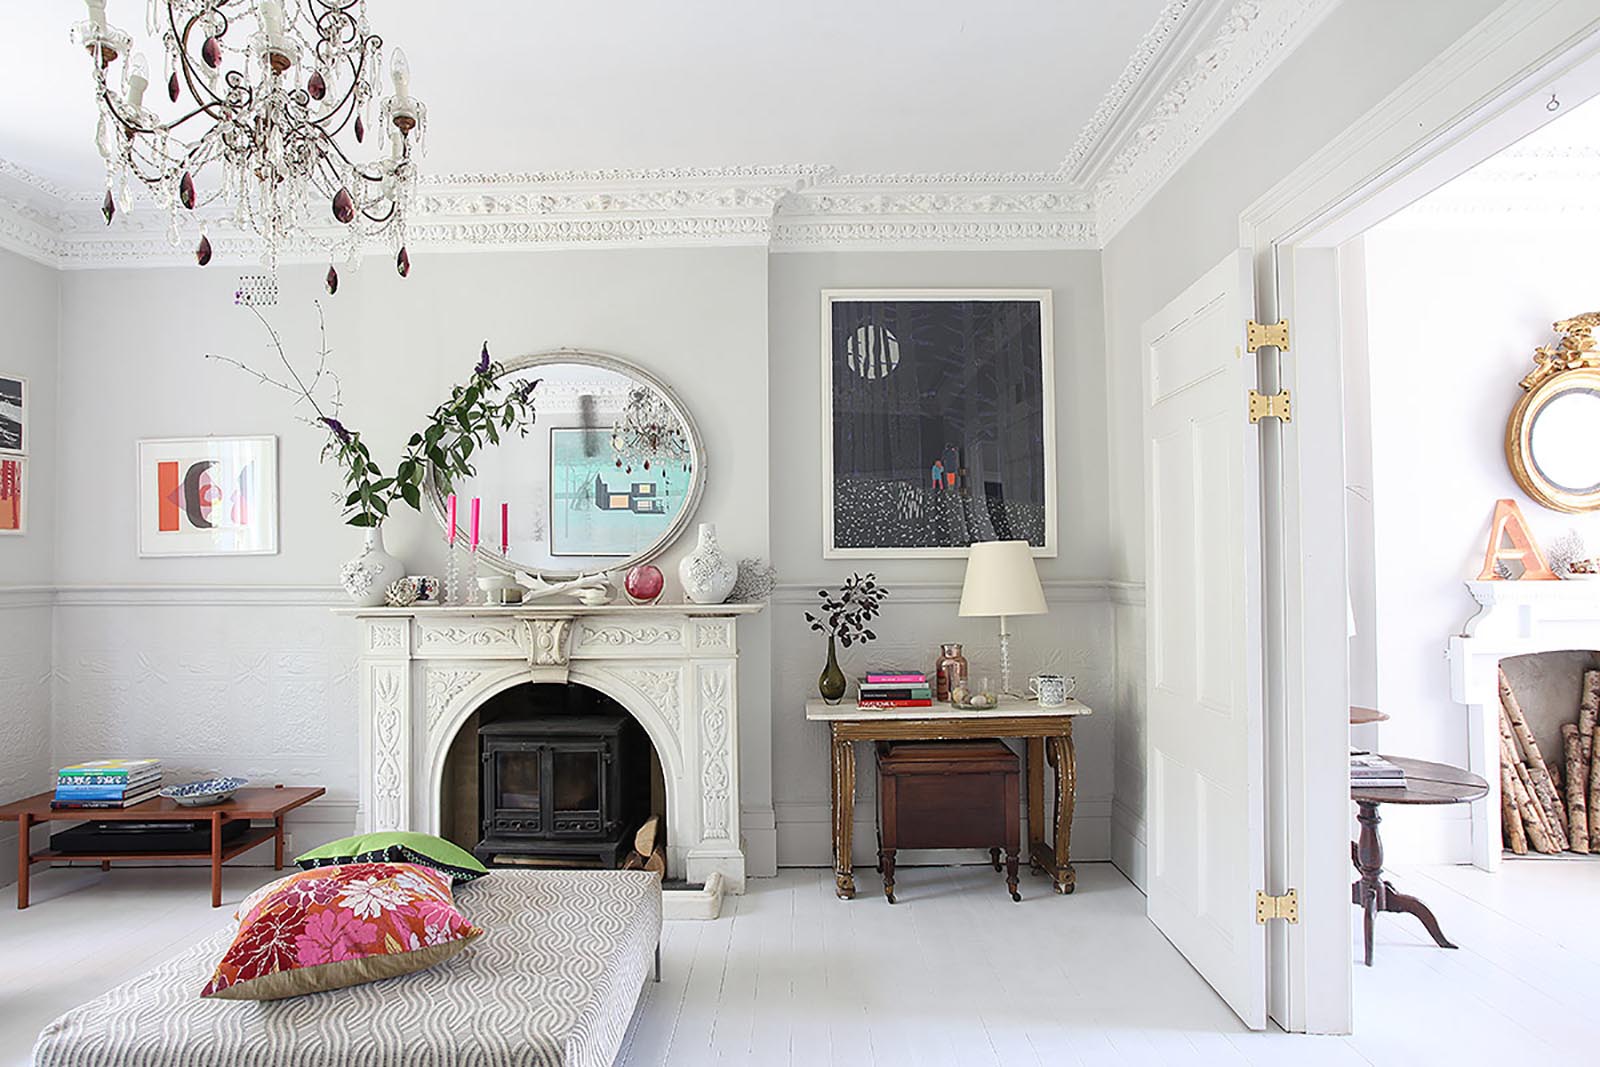 Interiors: modern meets traditional in a London home